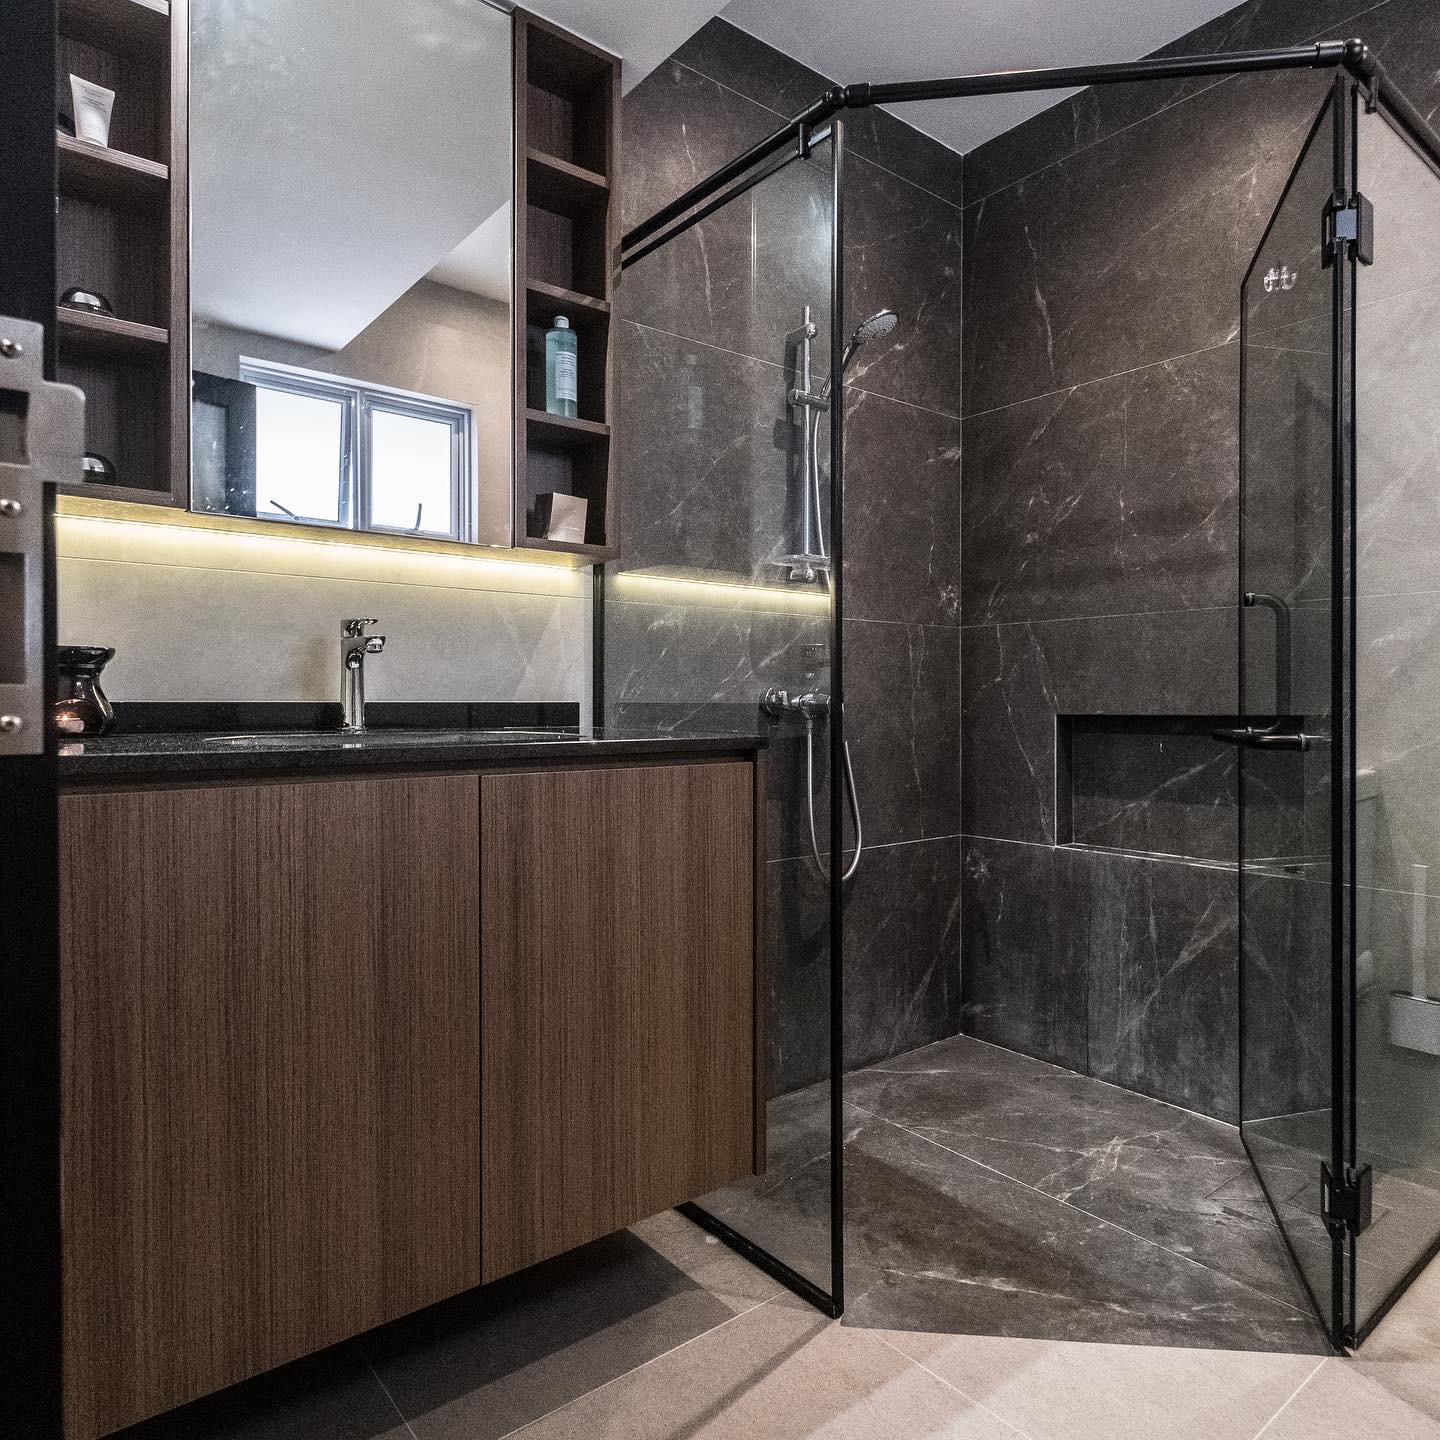 Contemporary, Modern, Others Design - Bathroom - HDB Executive Apartment - Design by United Team Lifestyle